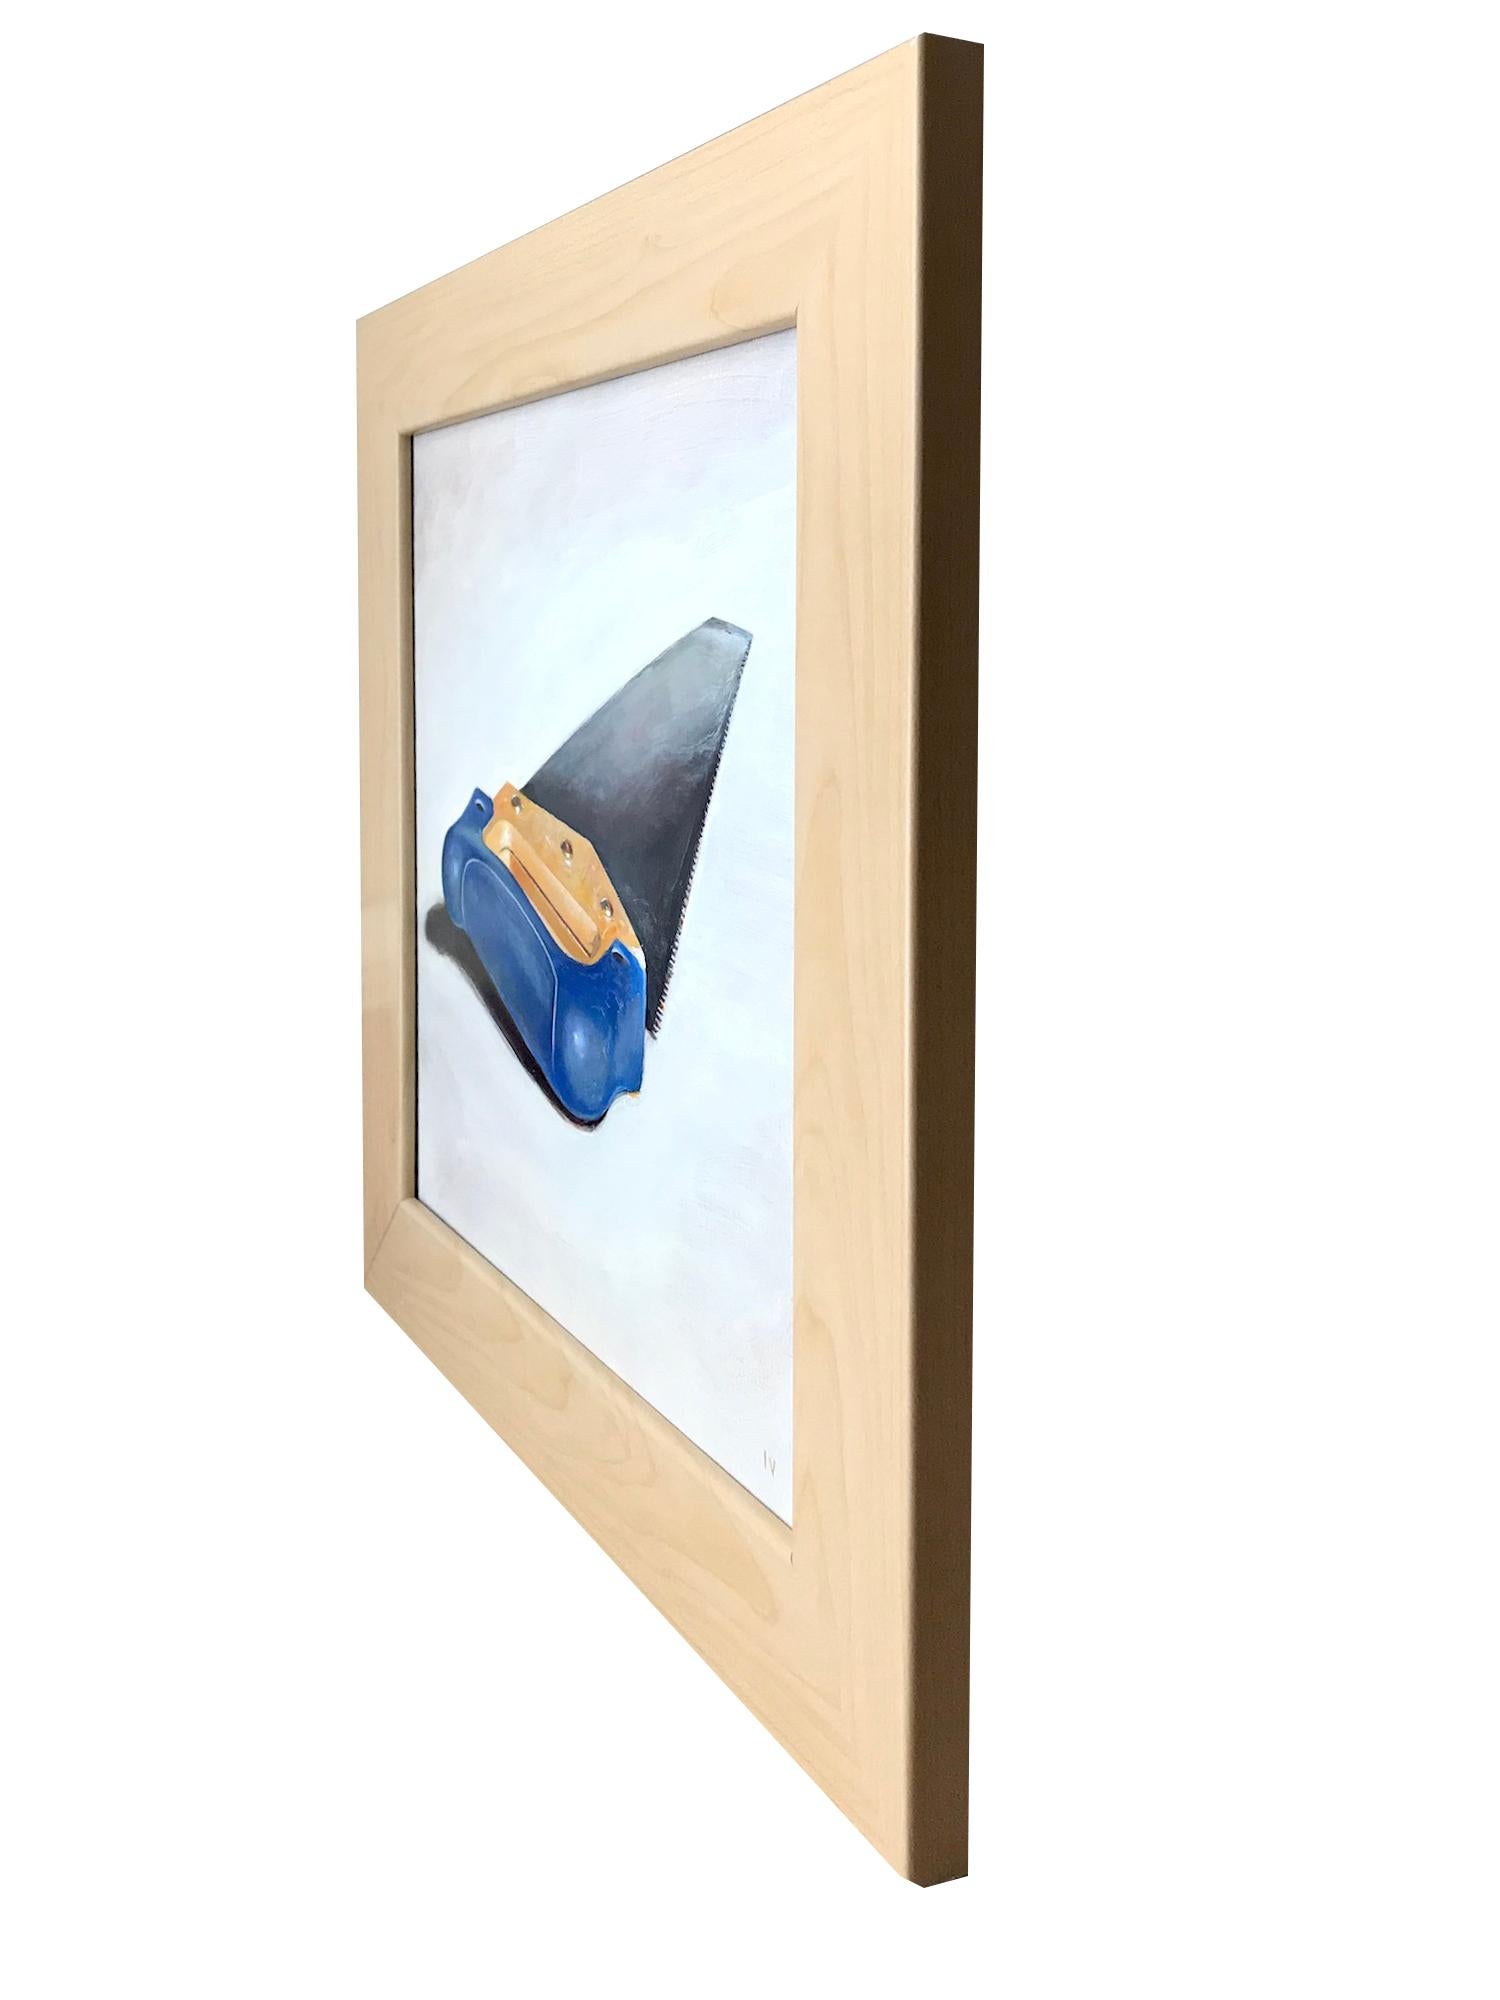 Saw (Realistic Still Life Oil Painting Blue Everyday Tool in Light Wood Frame) For Sale 1